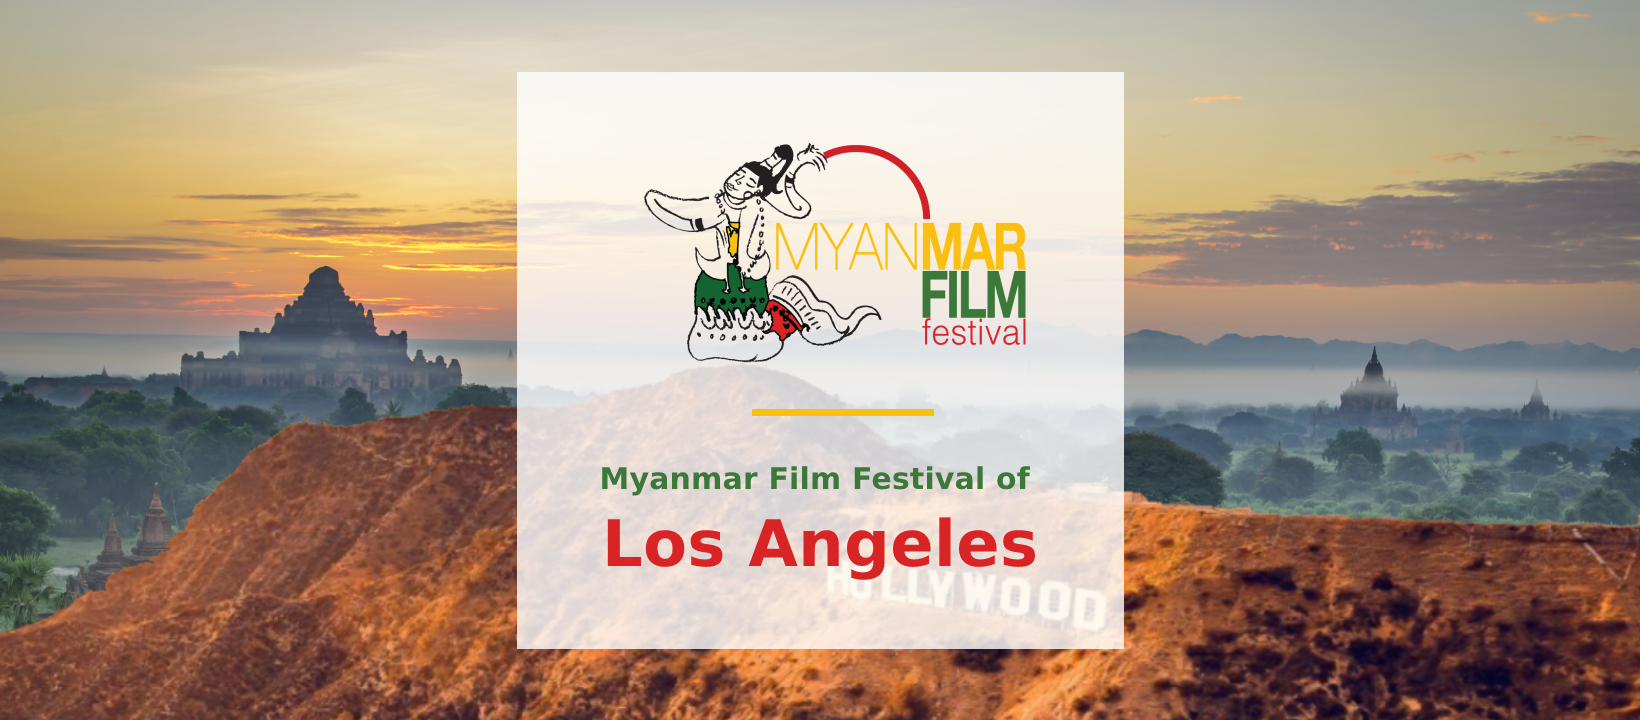 CALL FOR ENTRIES: 2020 Myanmar Film Festival of Los Angeles: AUGUST 15, 2020